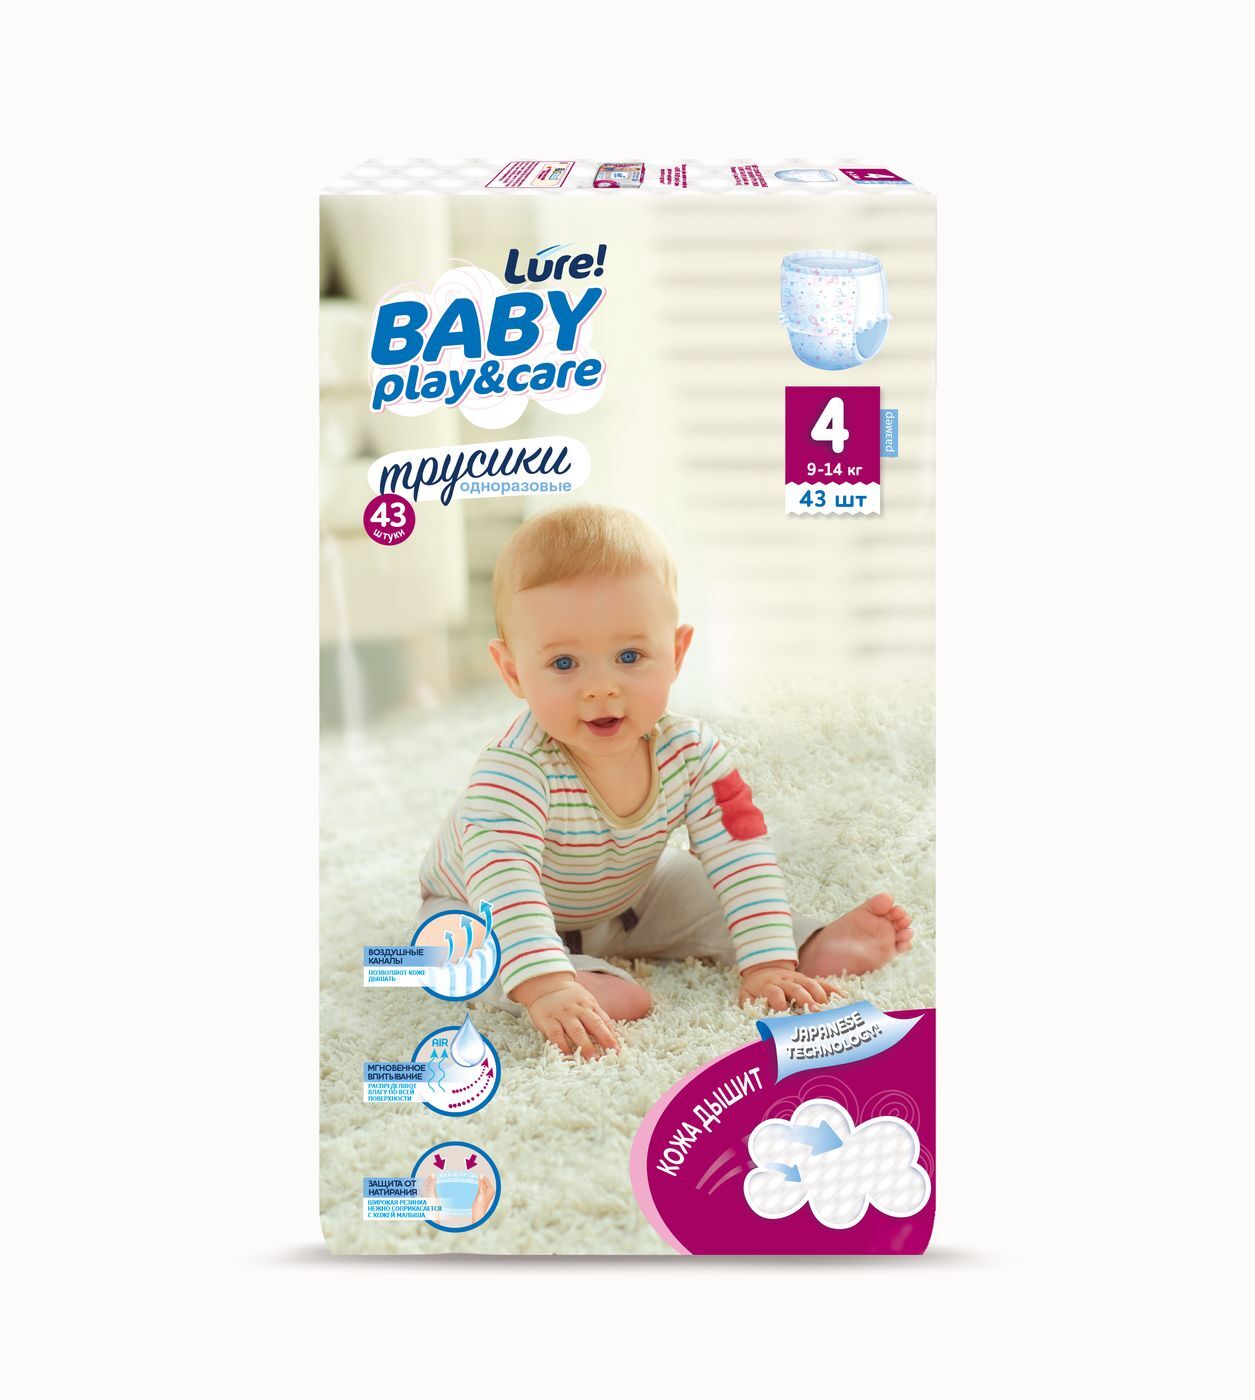 Lure baby play care md330ll a retina display